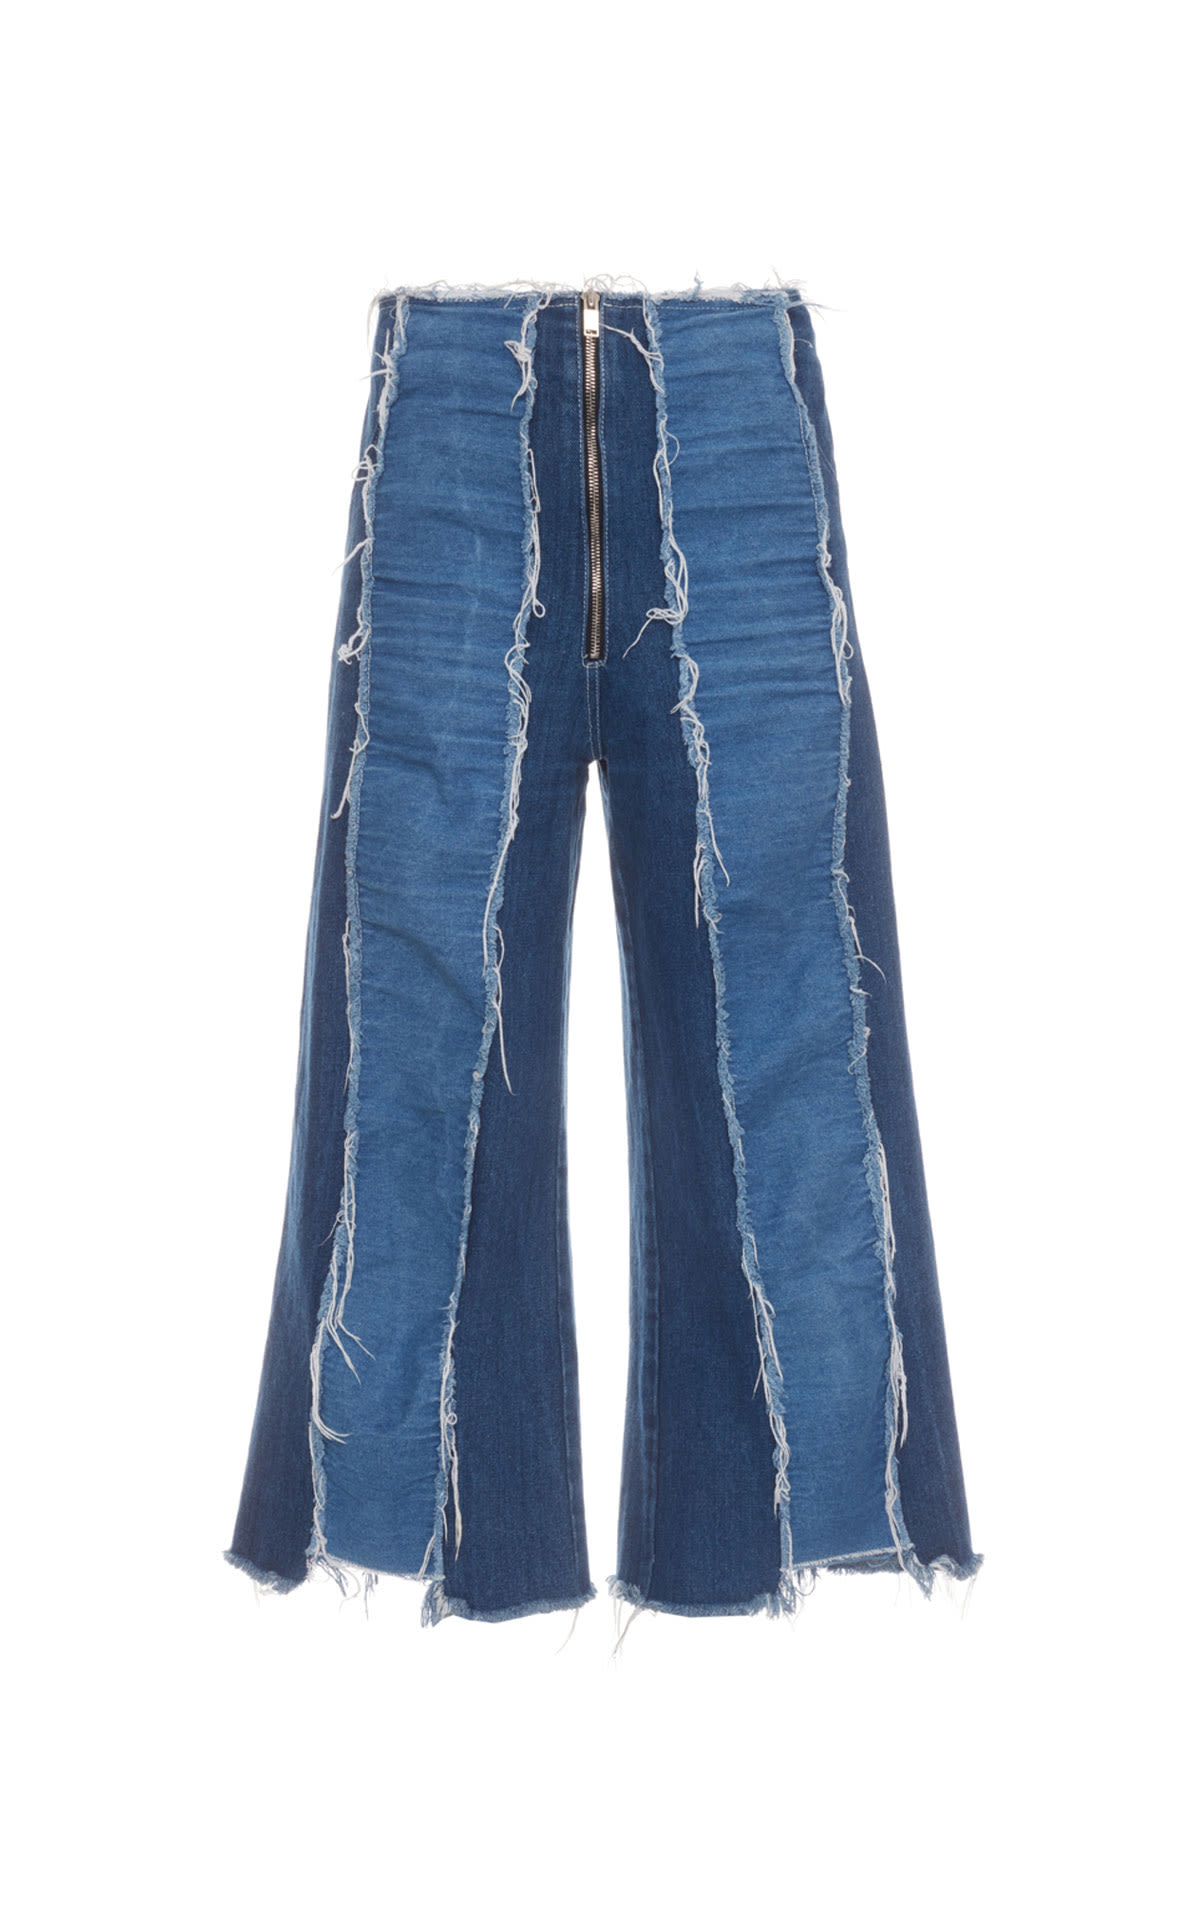 DO GOOD Rejina Pyo Deconstructed jeans from Bicester Village